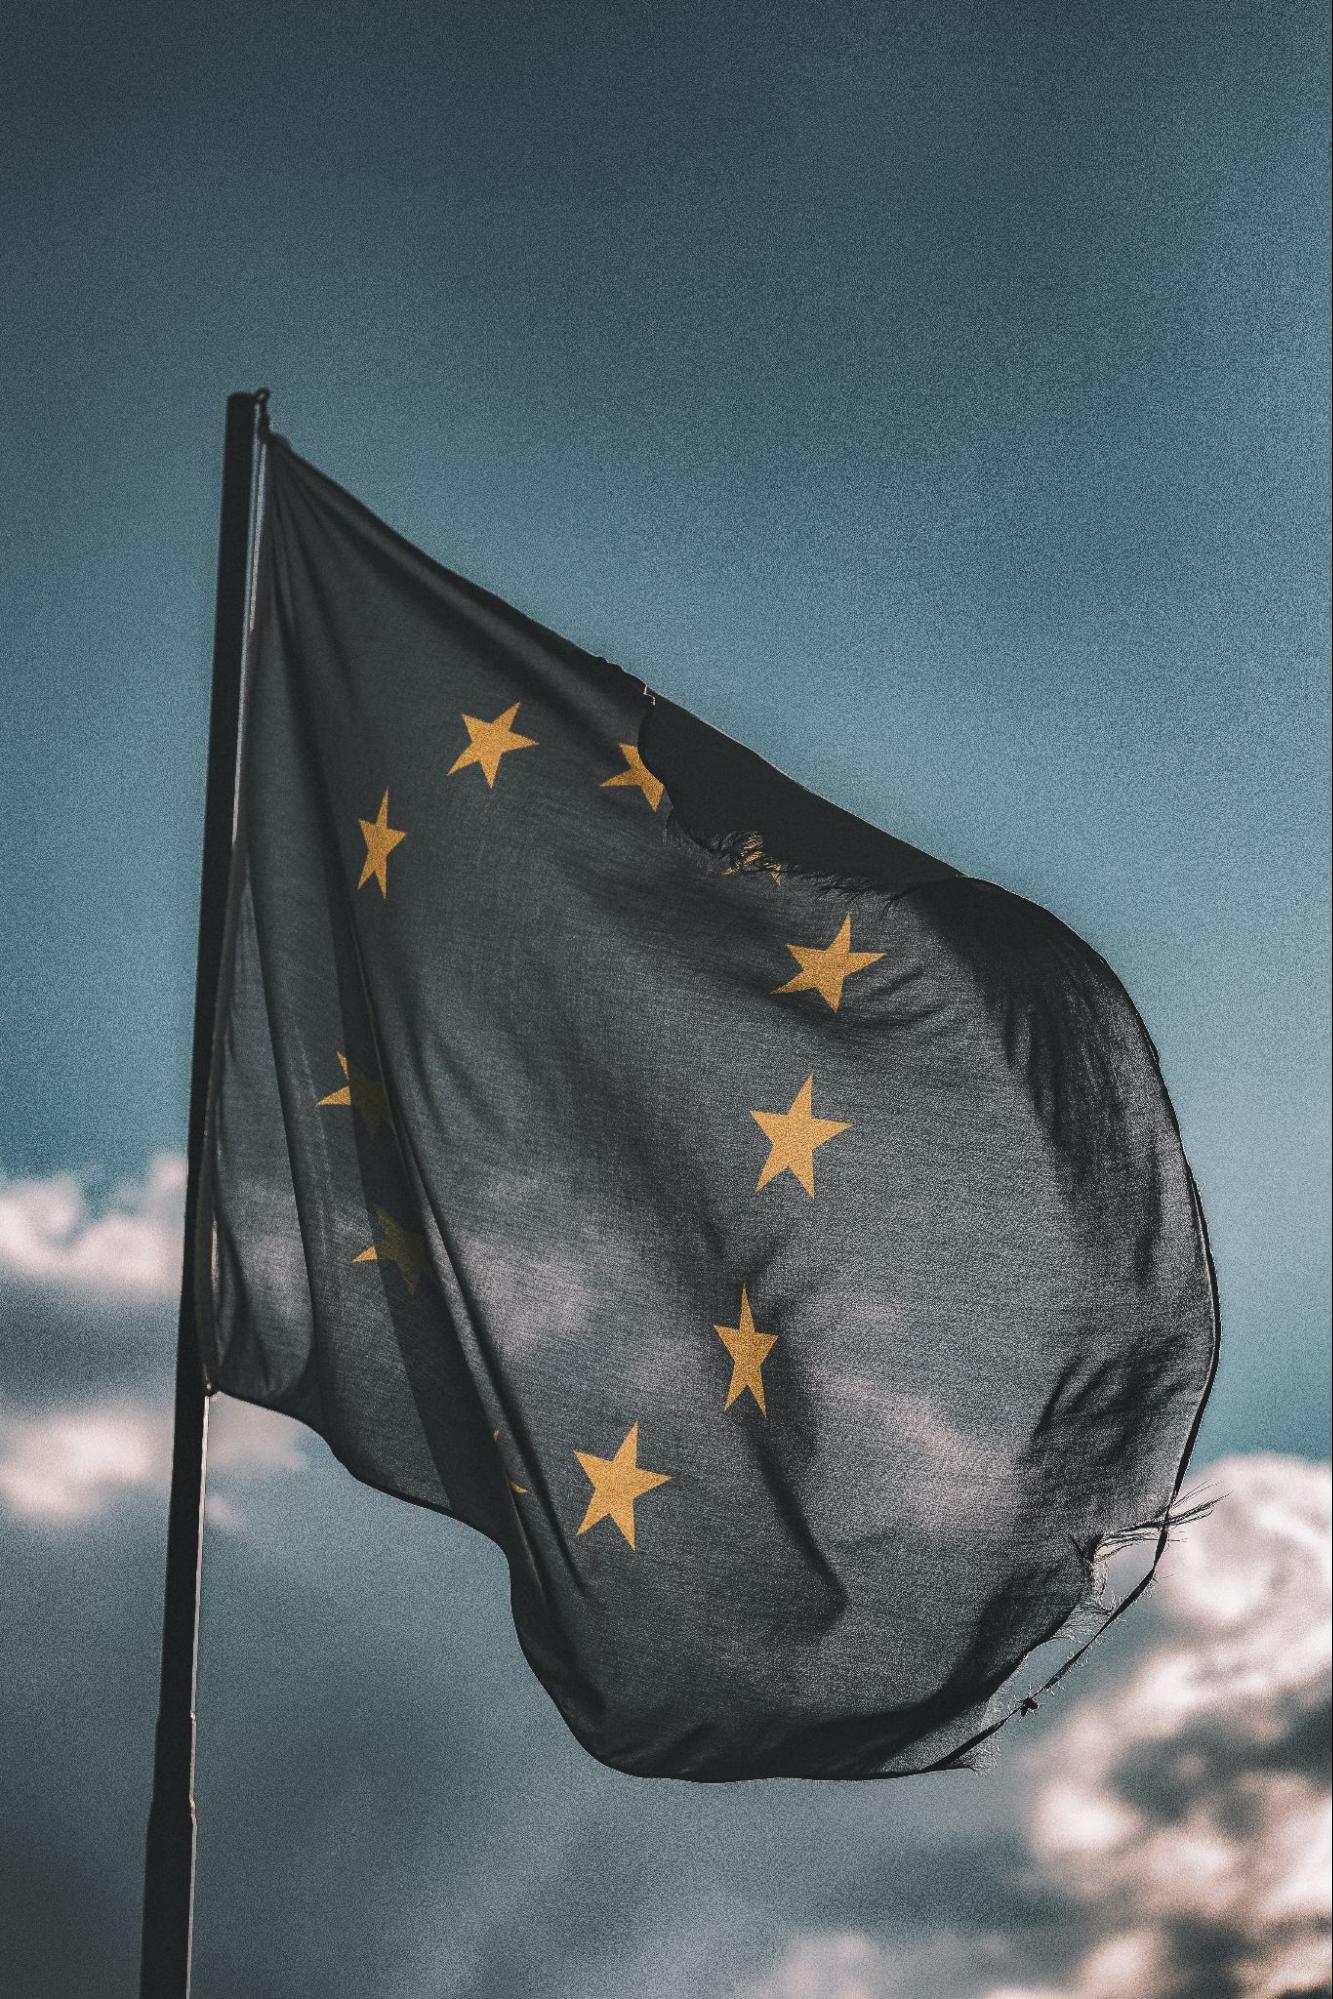 The History Behind: European Union